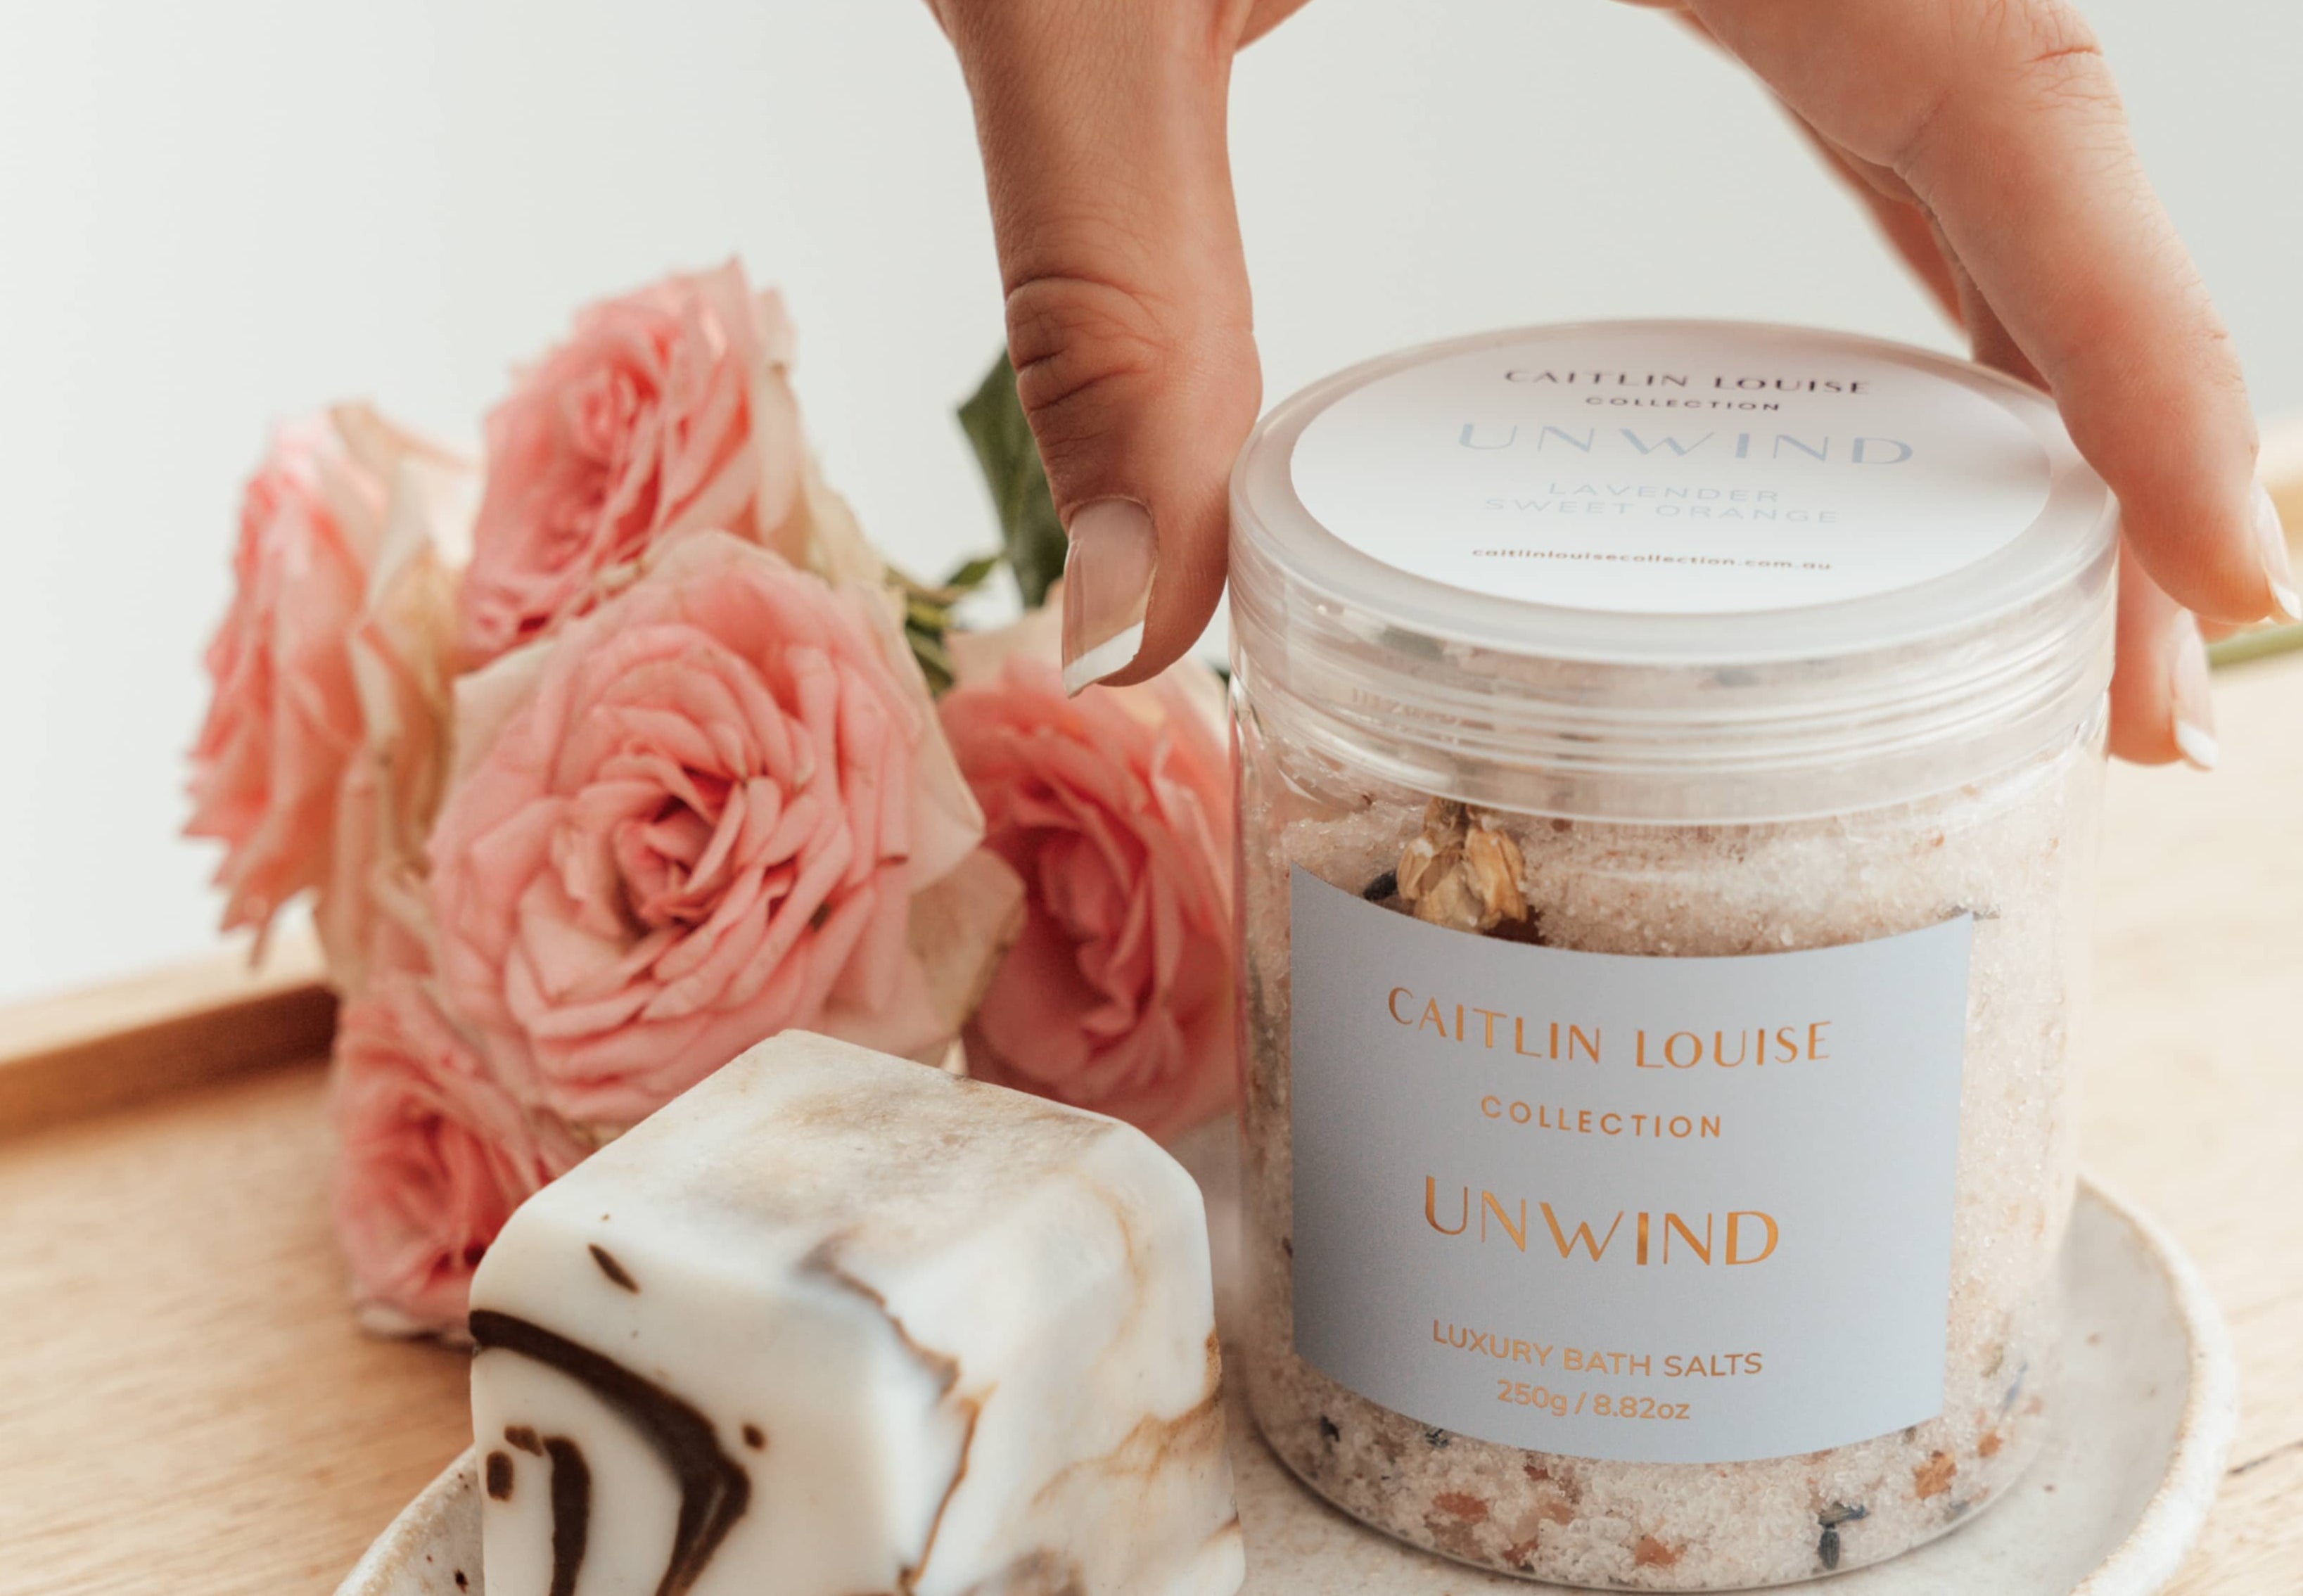 Hand reaching for Caitlin Louise Collection Unwind Luxury Bath Salts. Jar sitting on tray with flowers behind it.